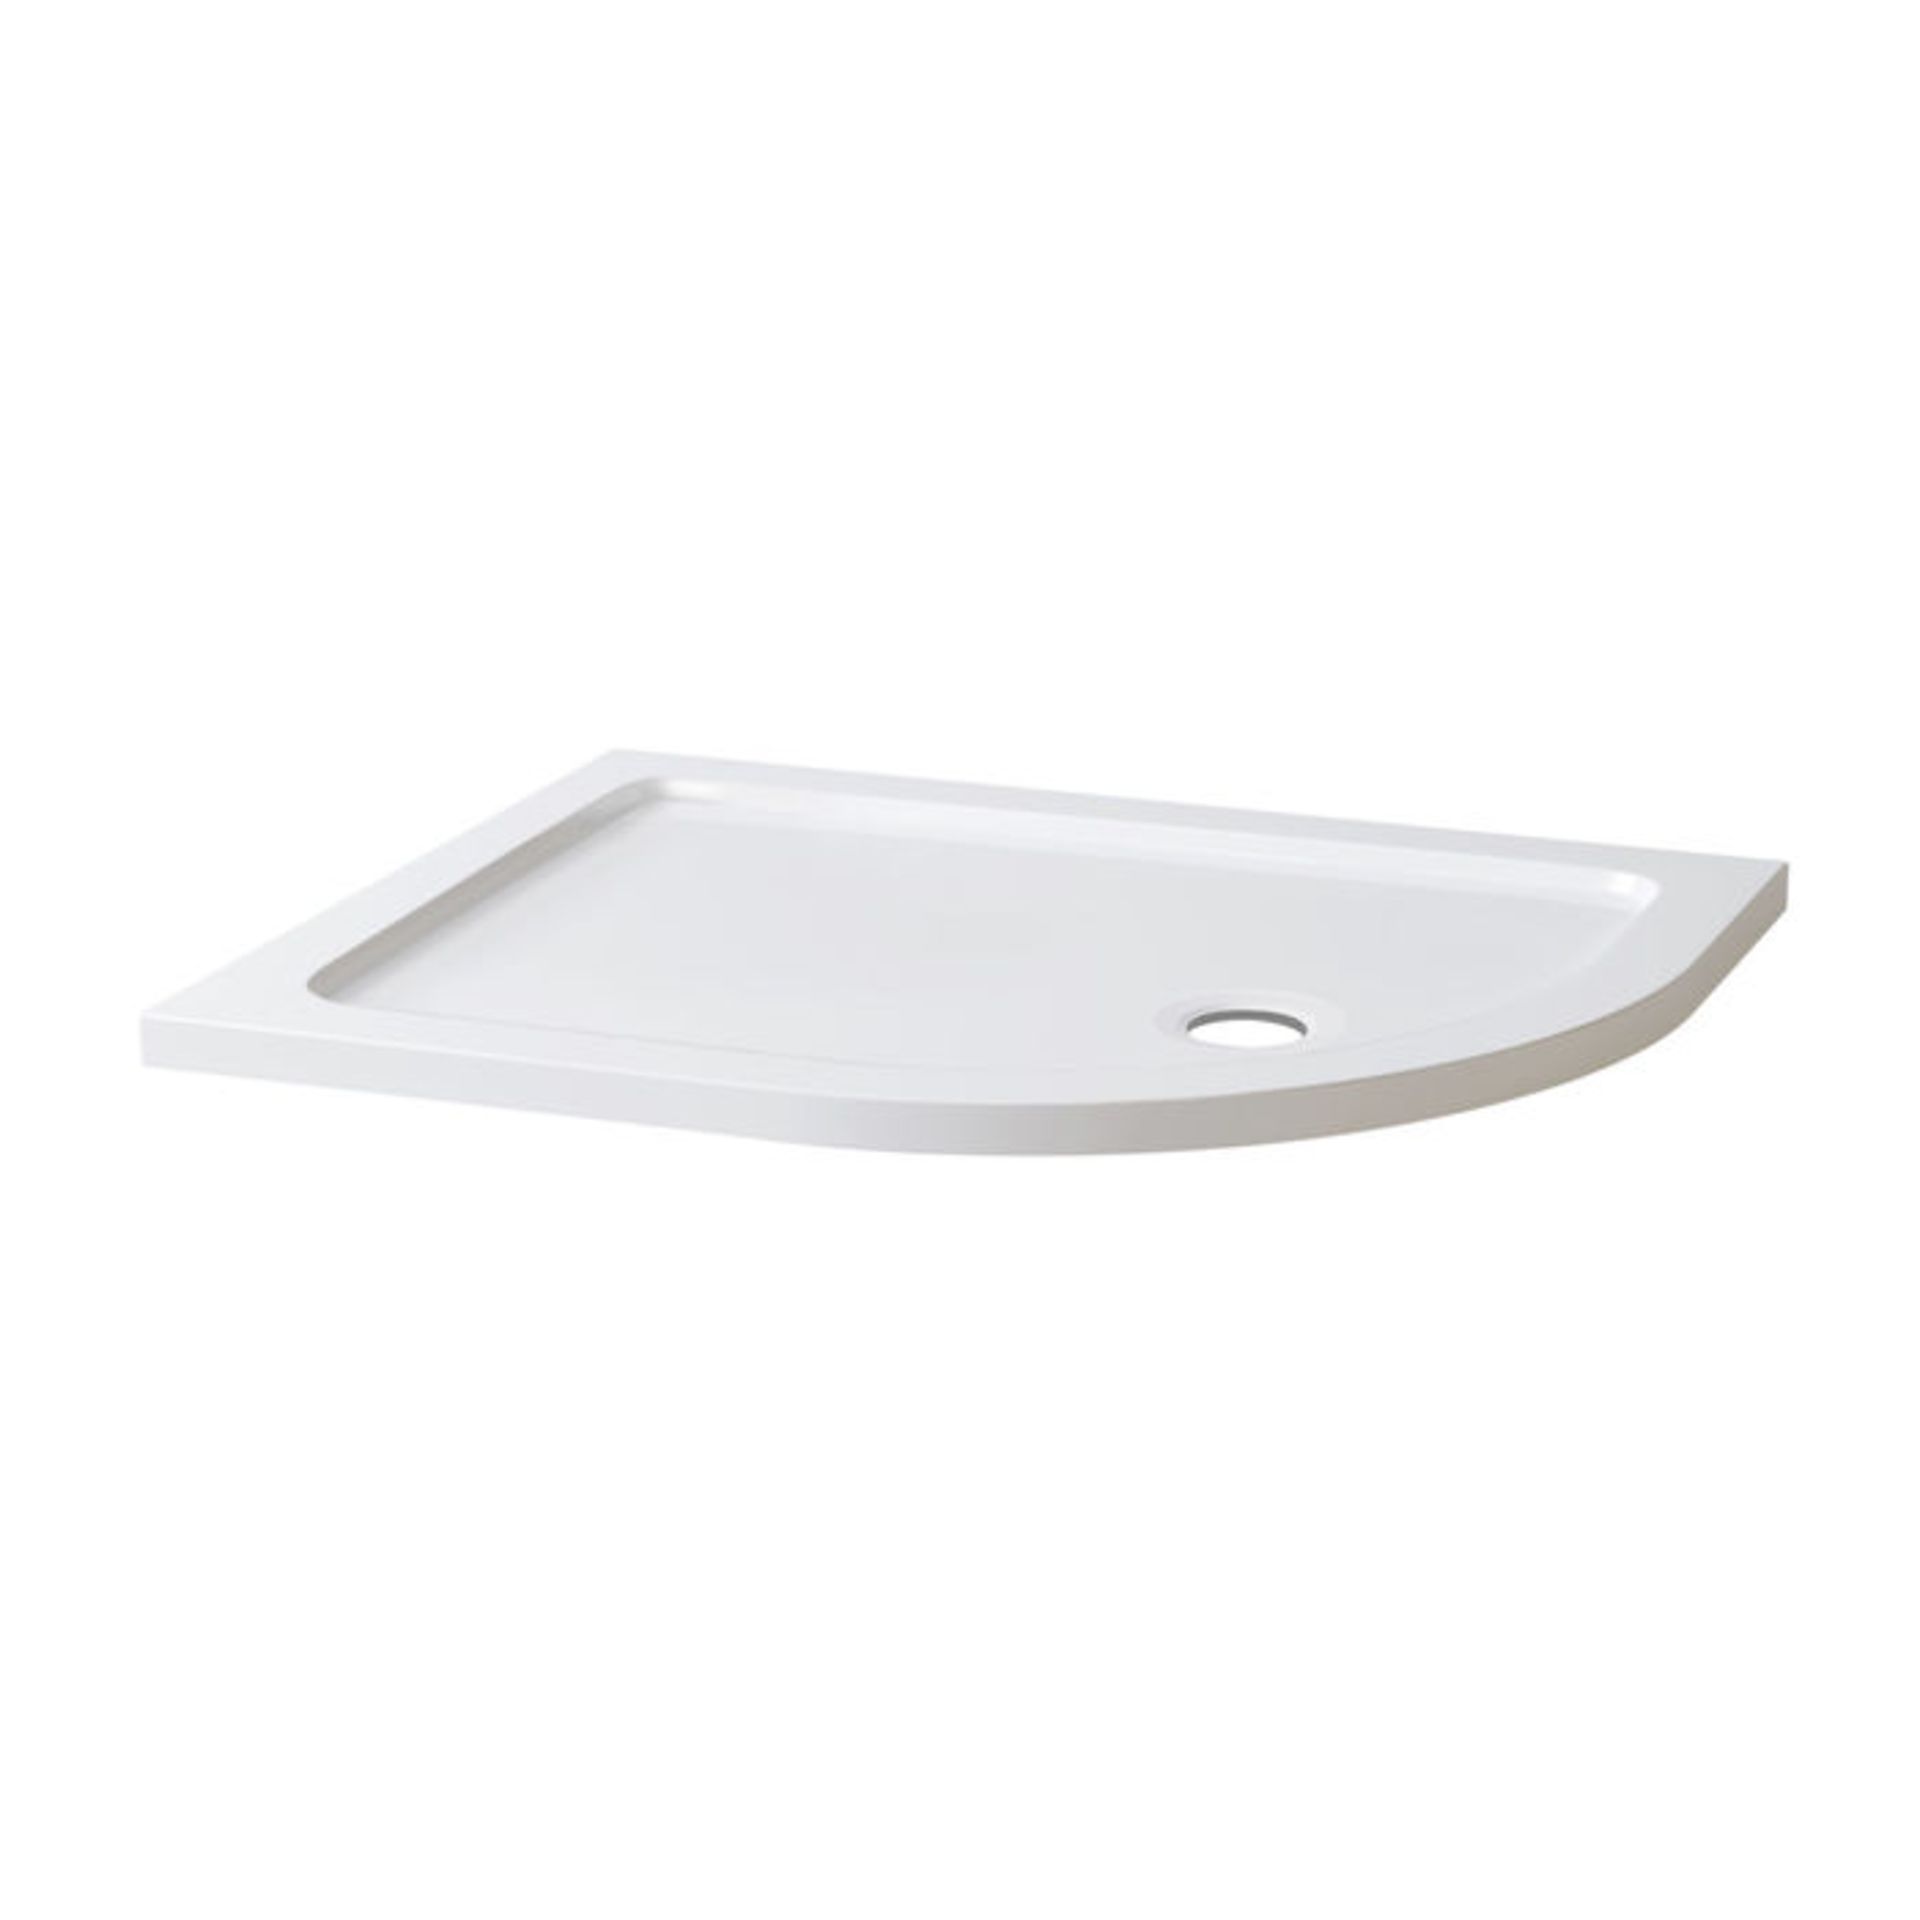 (NY63) 1000x800mm Offset Quadrant Ultra Slim Stone Shower Tray - Right. RRP £249.99. Low profile - Image 2 of 2